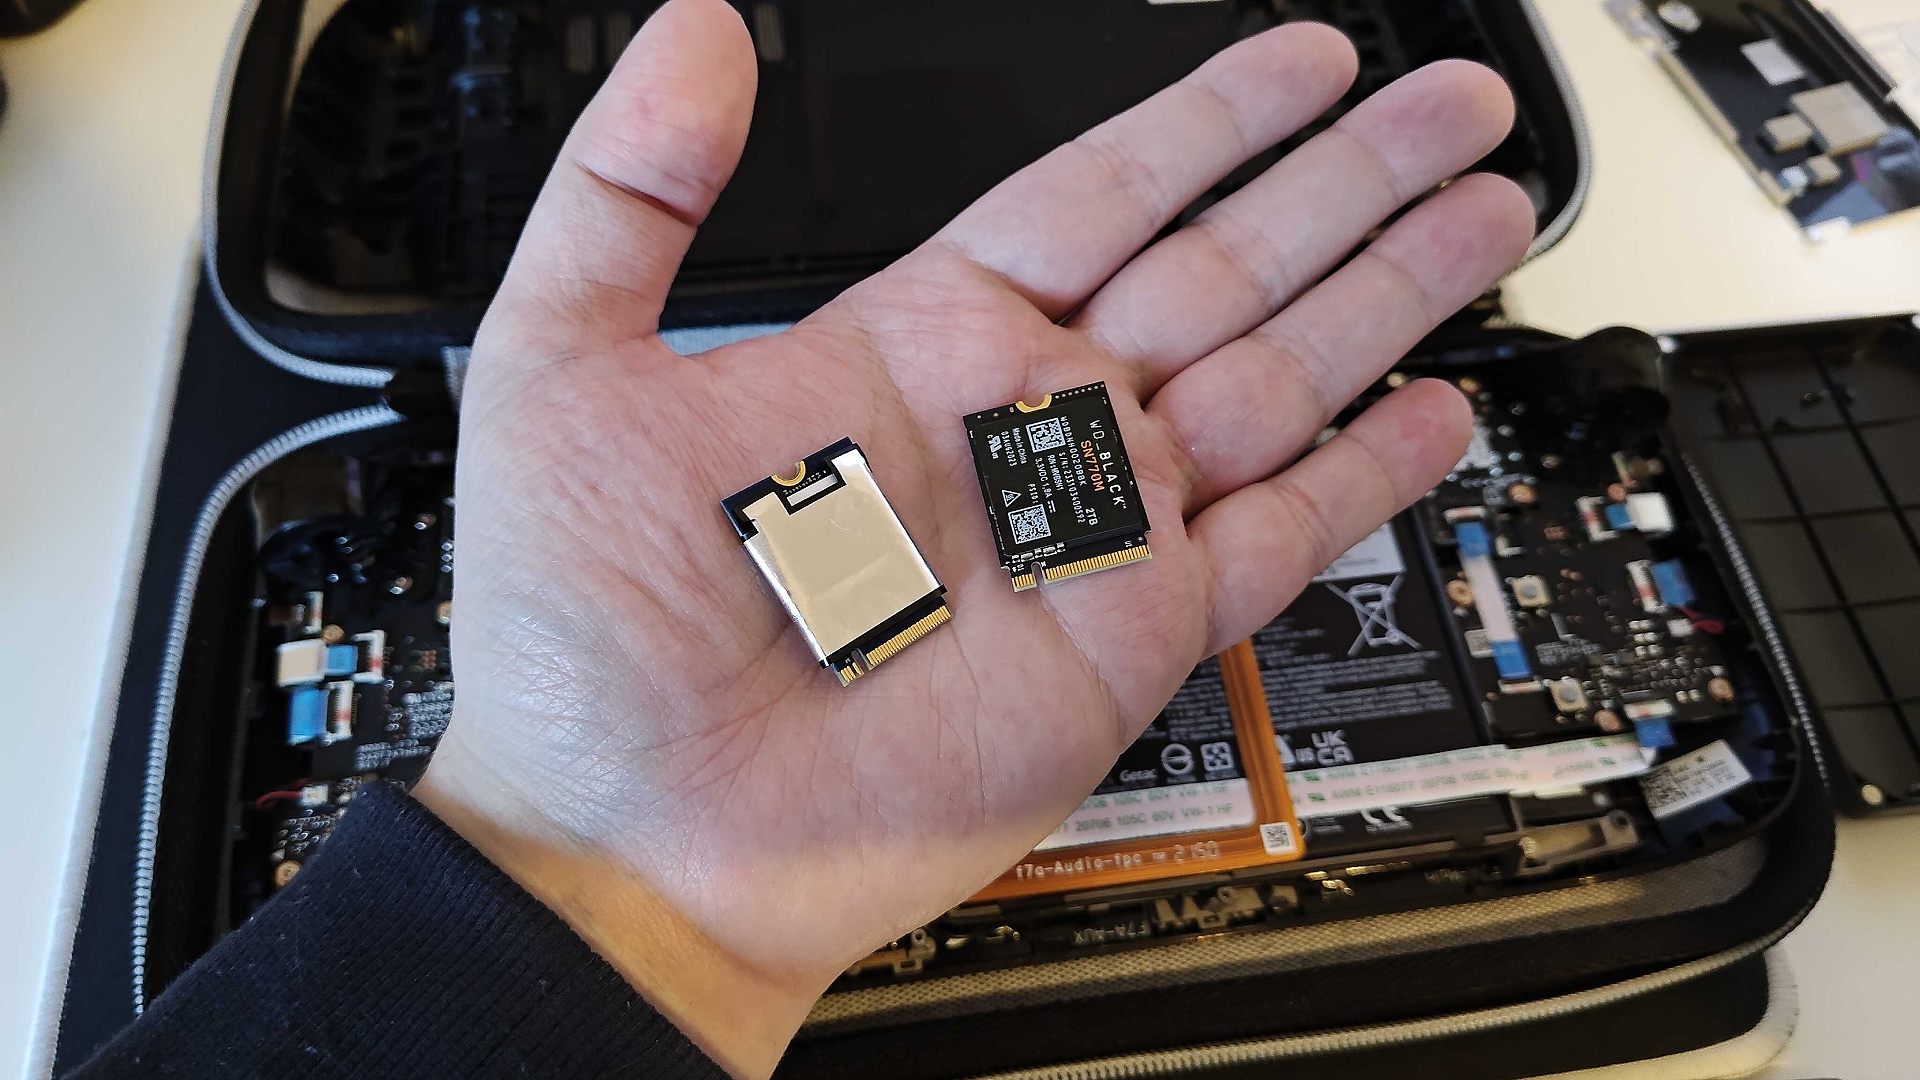 WD Black SN770M next to Kingston Steam Deck SSD in palm of hand